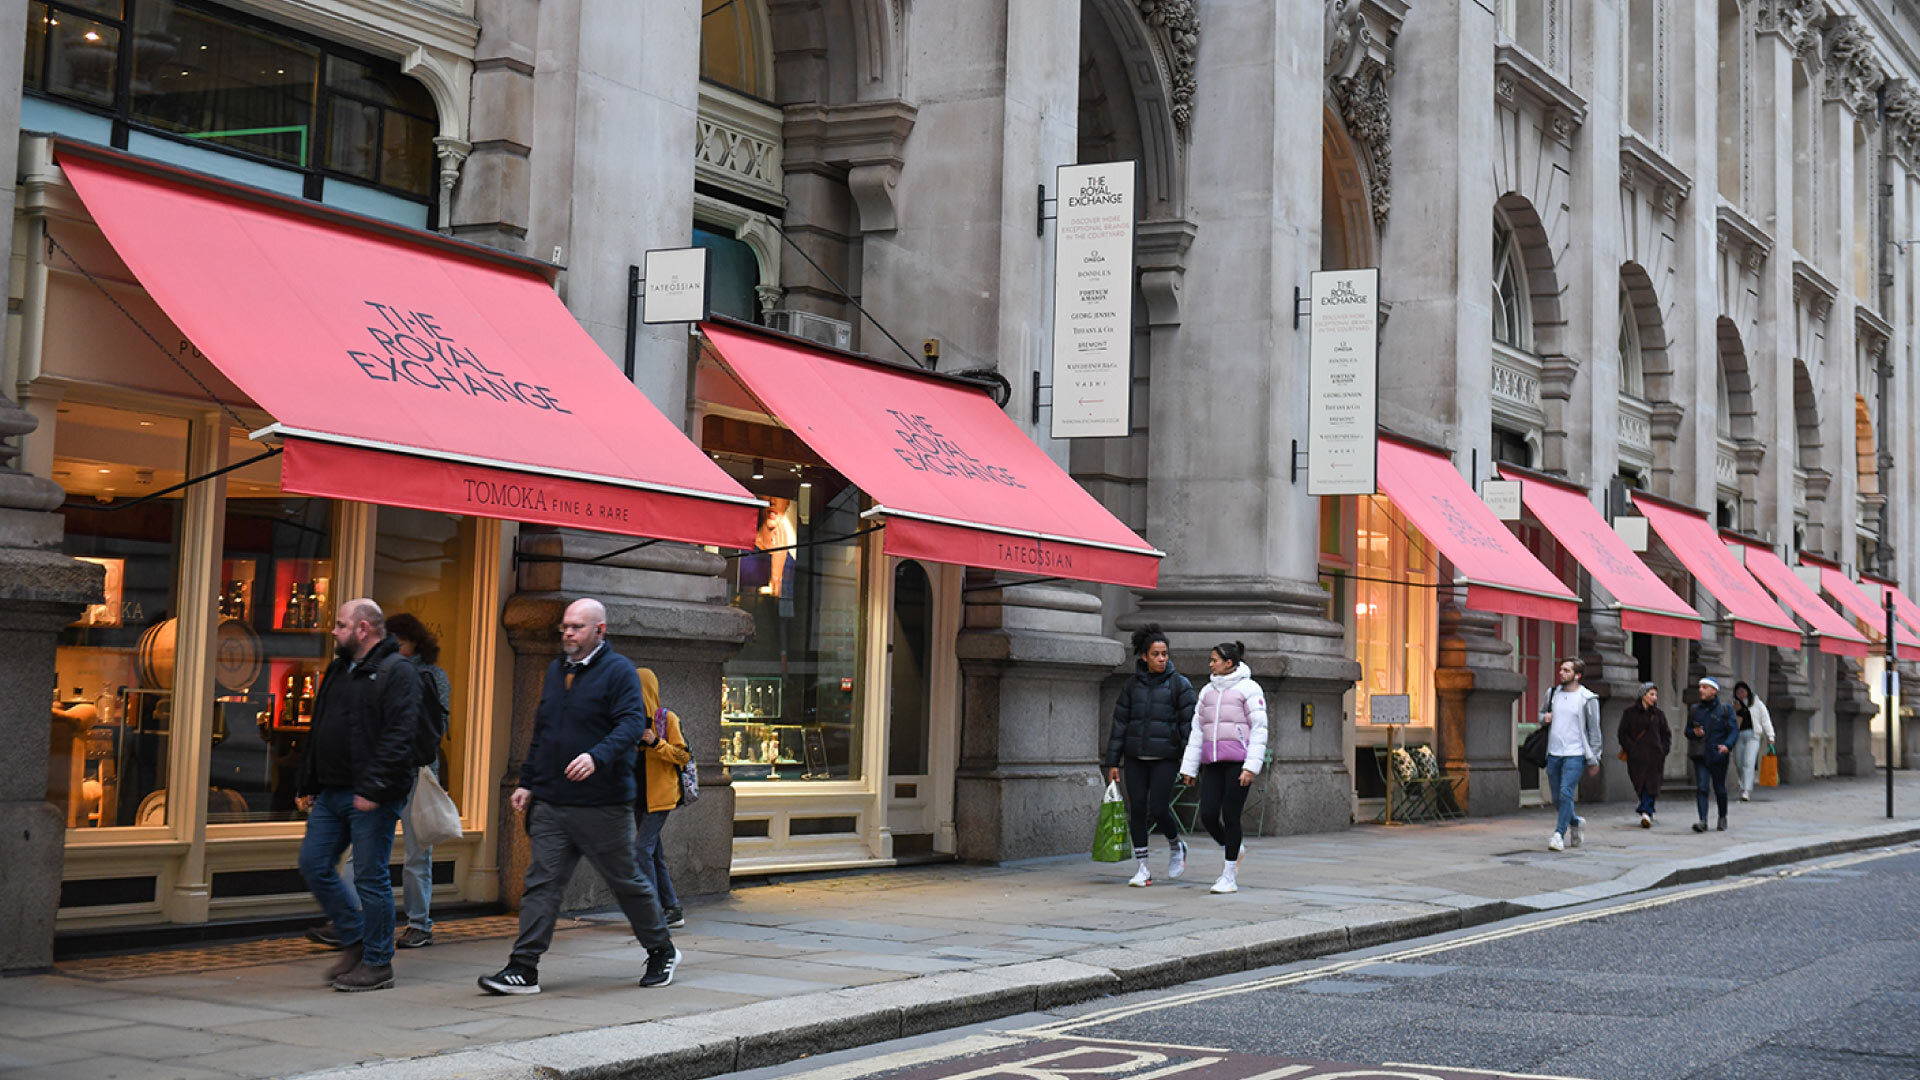 Luxury shopping in the City - The Royal Exchange - view of the shops along the street 